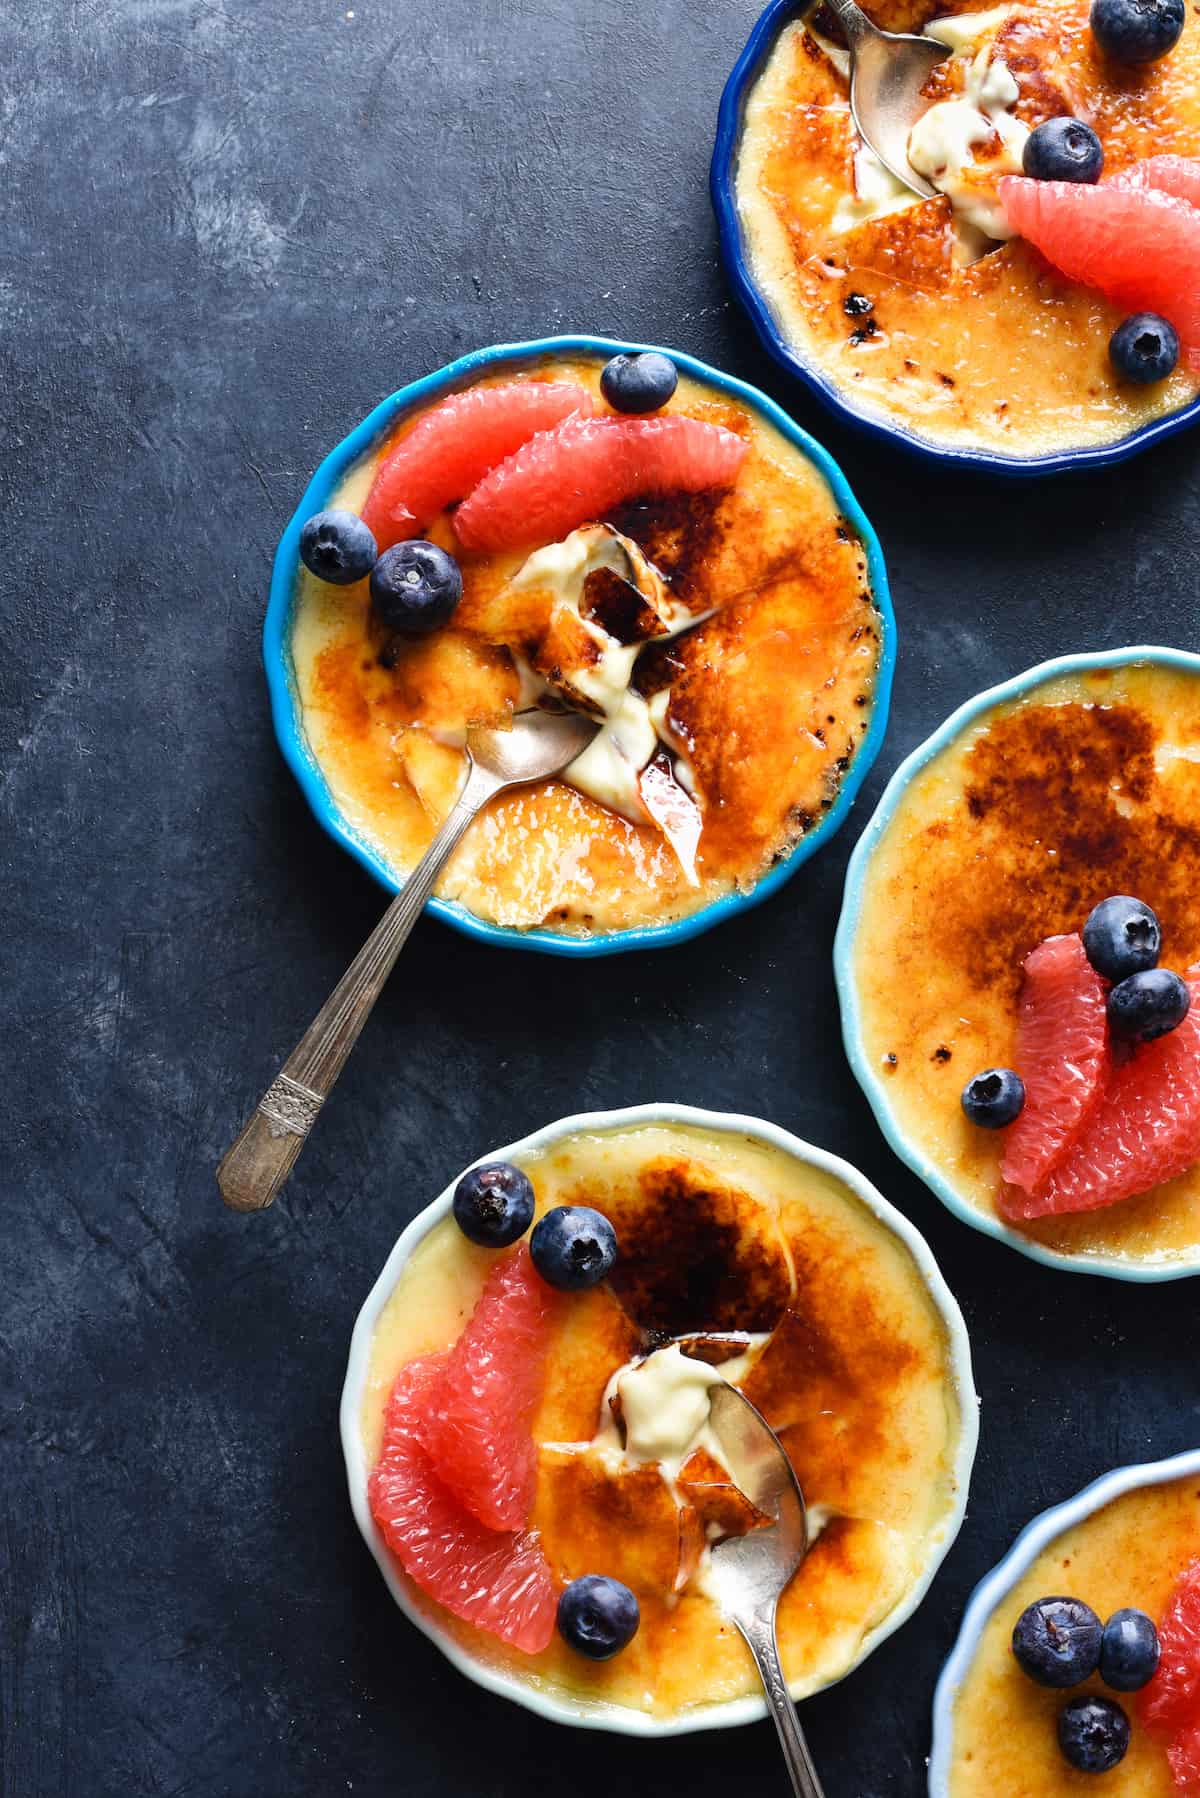 Preparing, torching and serving this Grapefruit Crème Brûlée is bound to make you feel like the kitchen superstar you are. Rich custard is flavored with sweet grapefruit juice and zest for a refreshing twist on a classic dessert. | foxeslovelemons.com